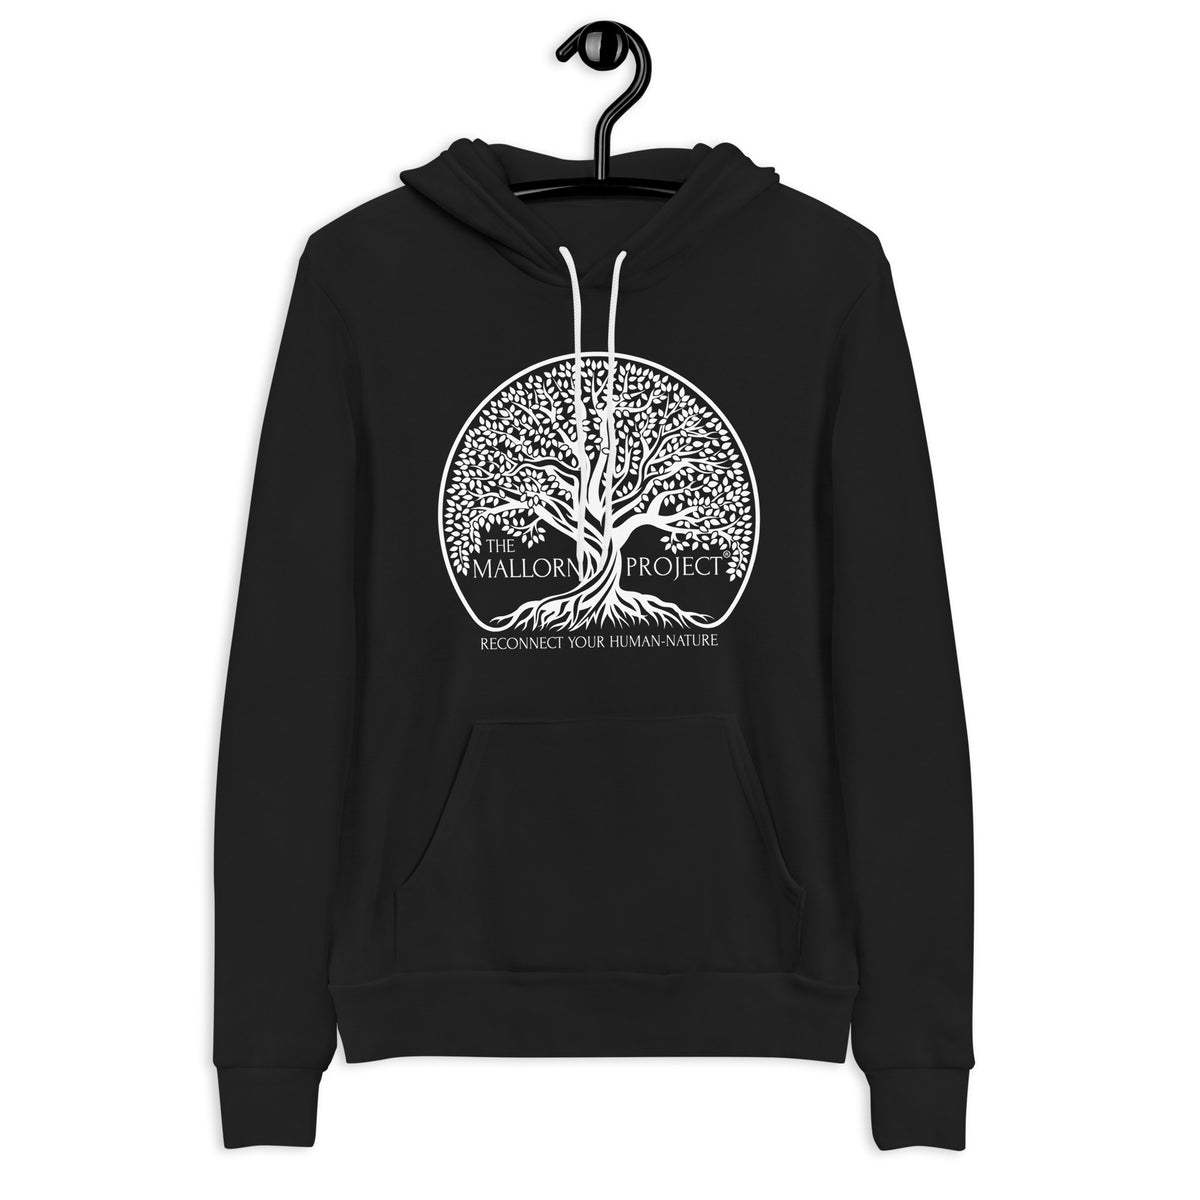 The Mallorn Project® Black/White Logo Unisex Silver Star Hoodie - Adult